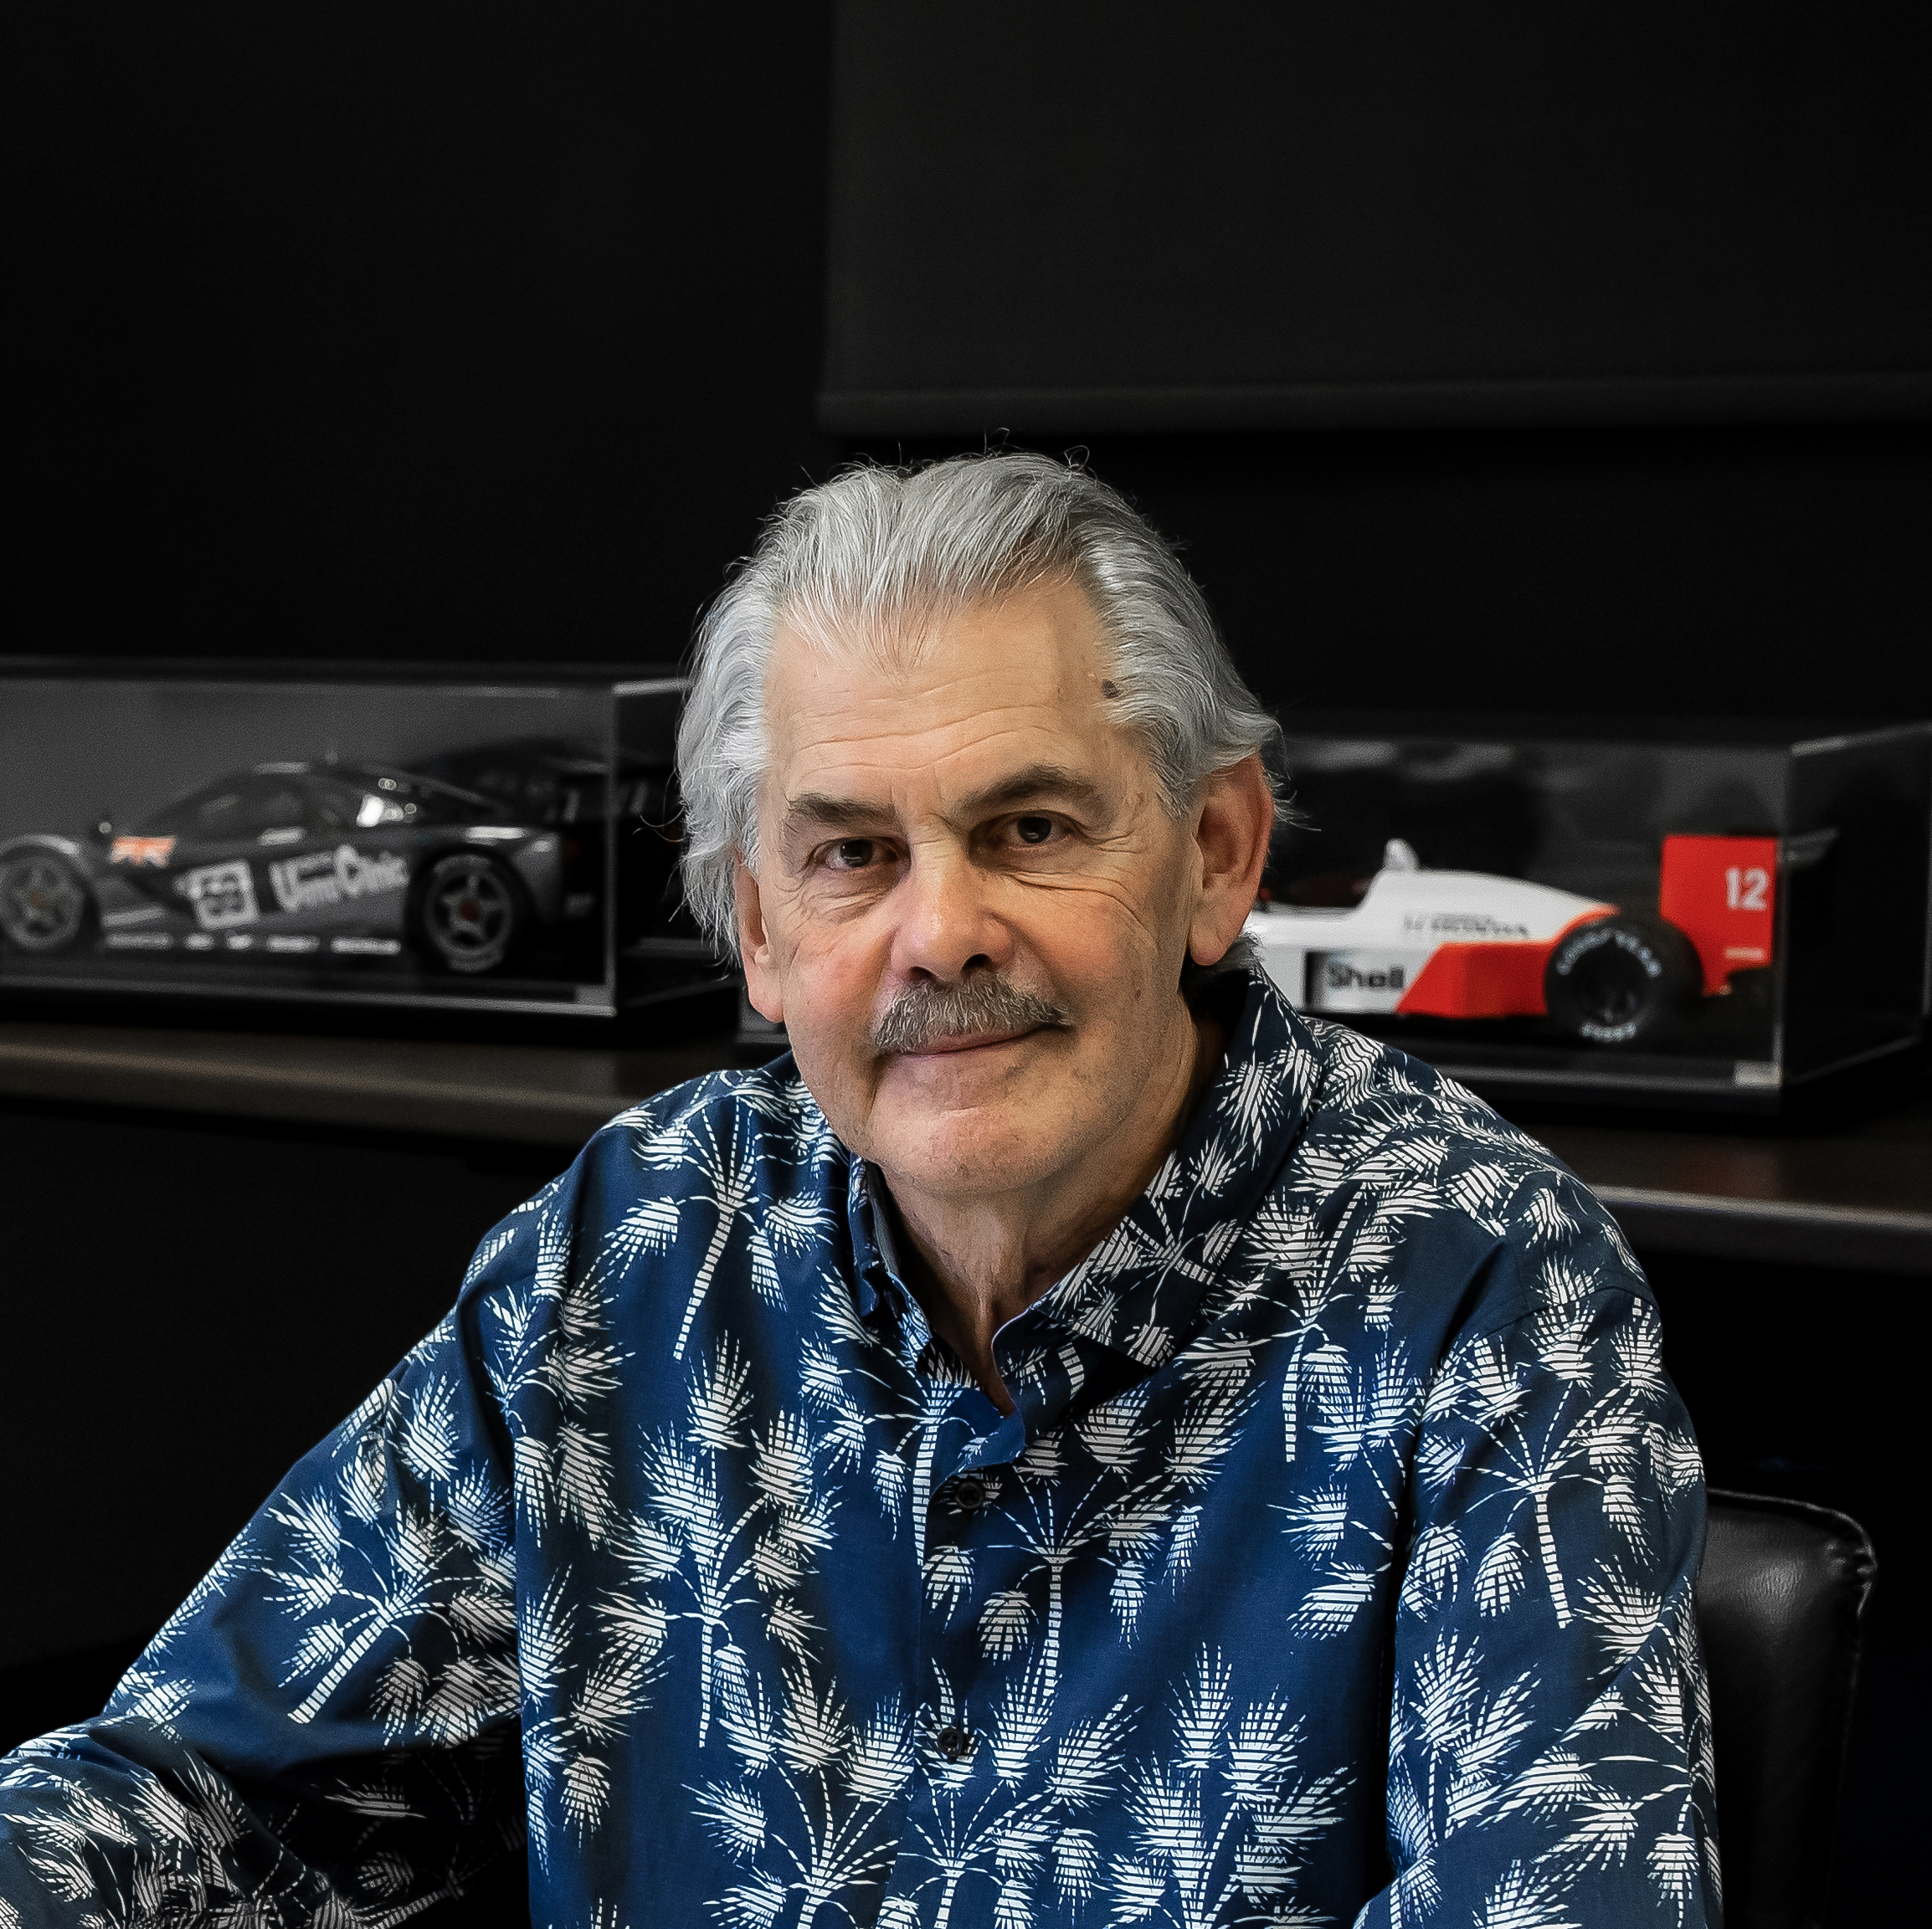 Gordon Murray tells Hagerty why his new T.50 hypercar will be